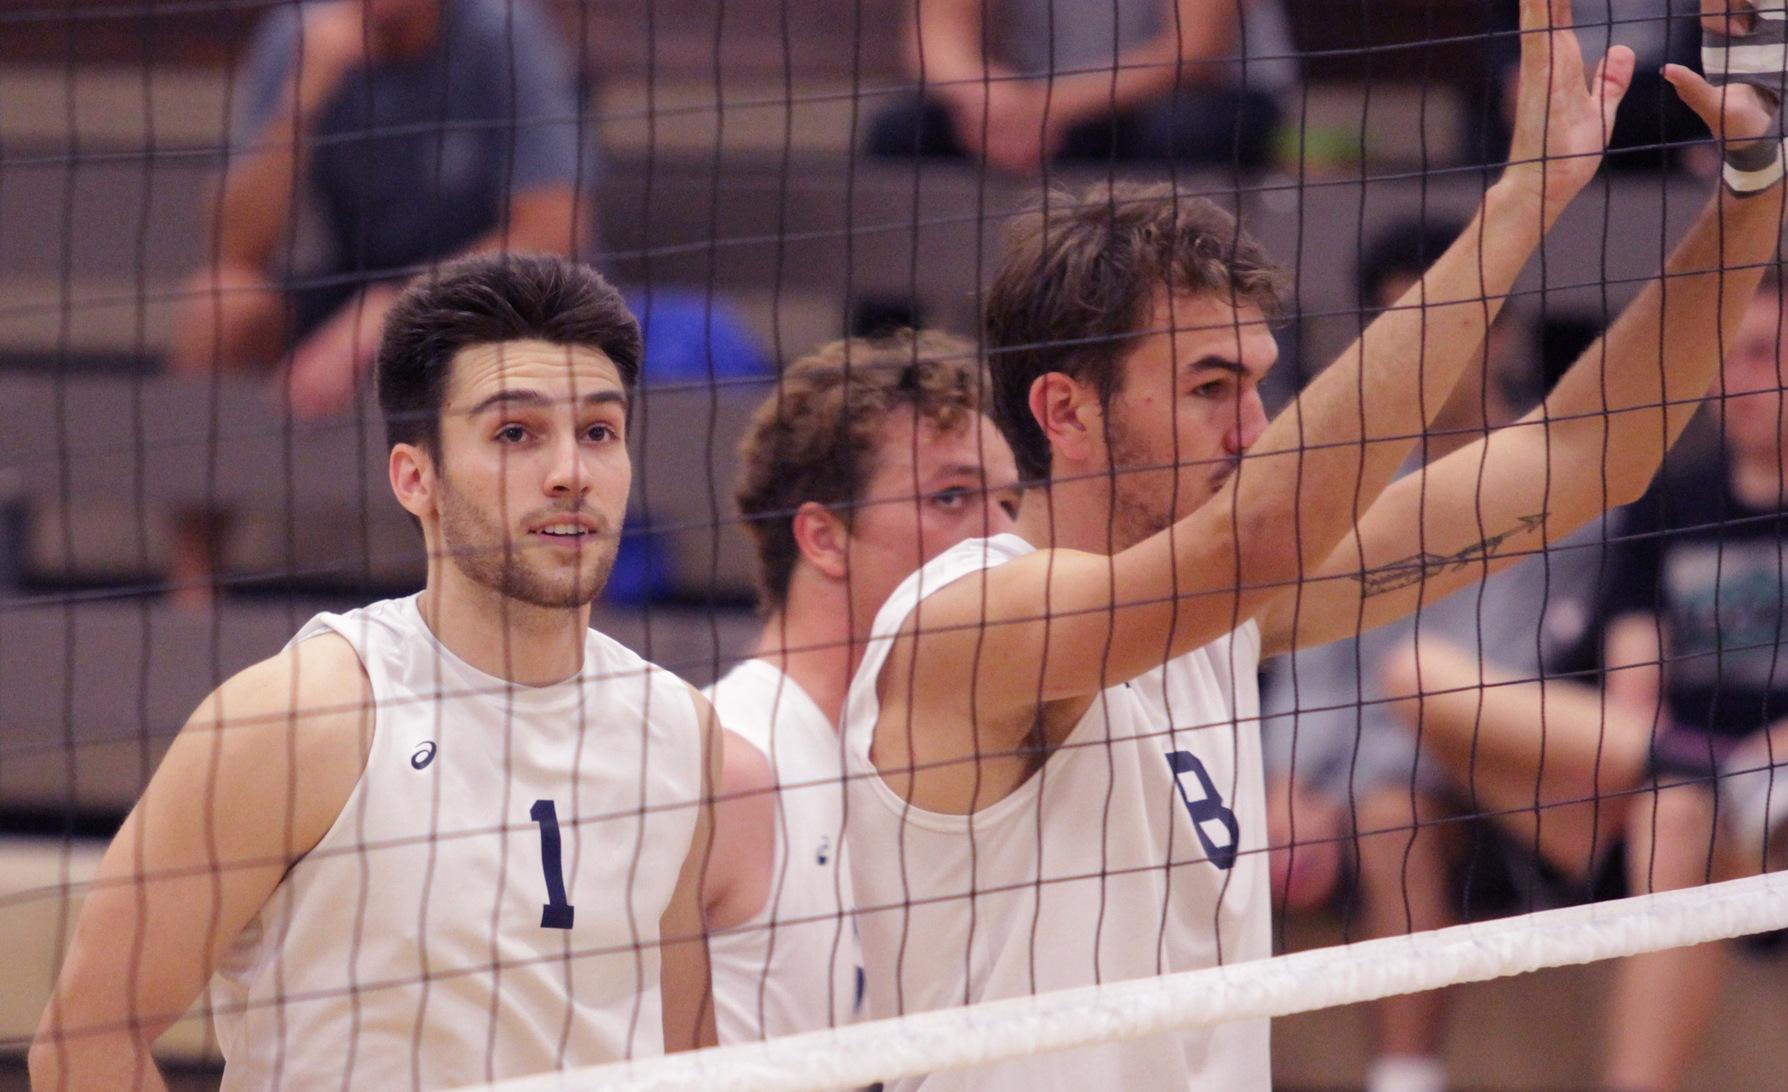 Men's volleyball team to host El Camino in playoff opener